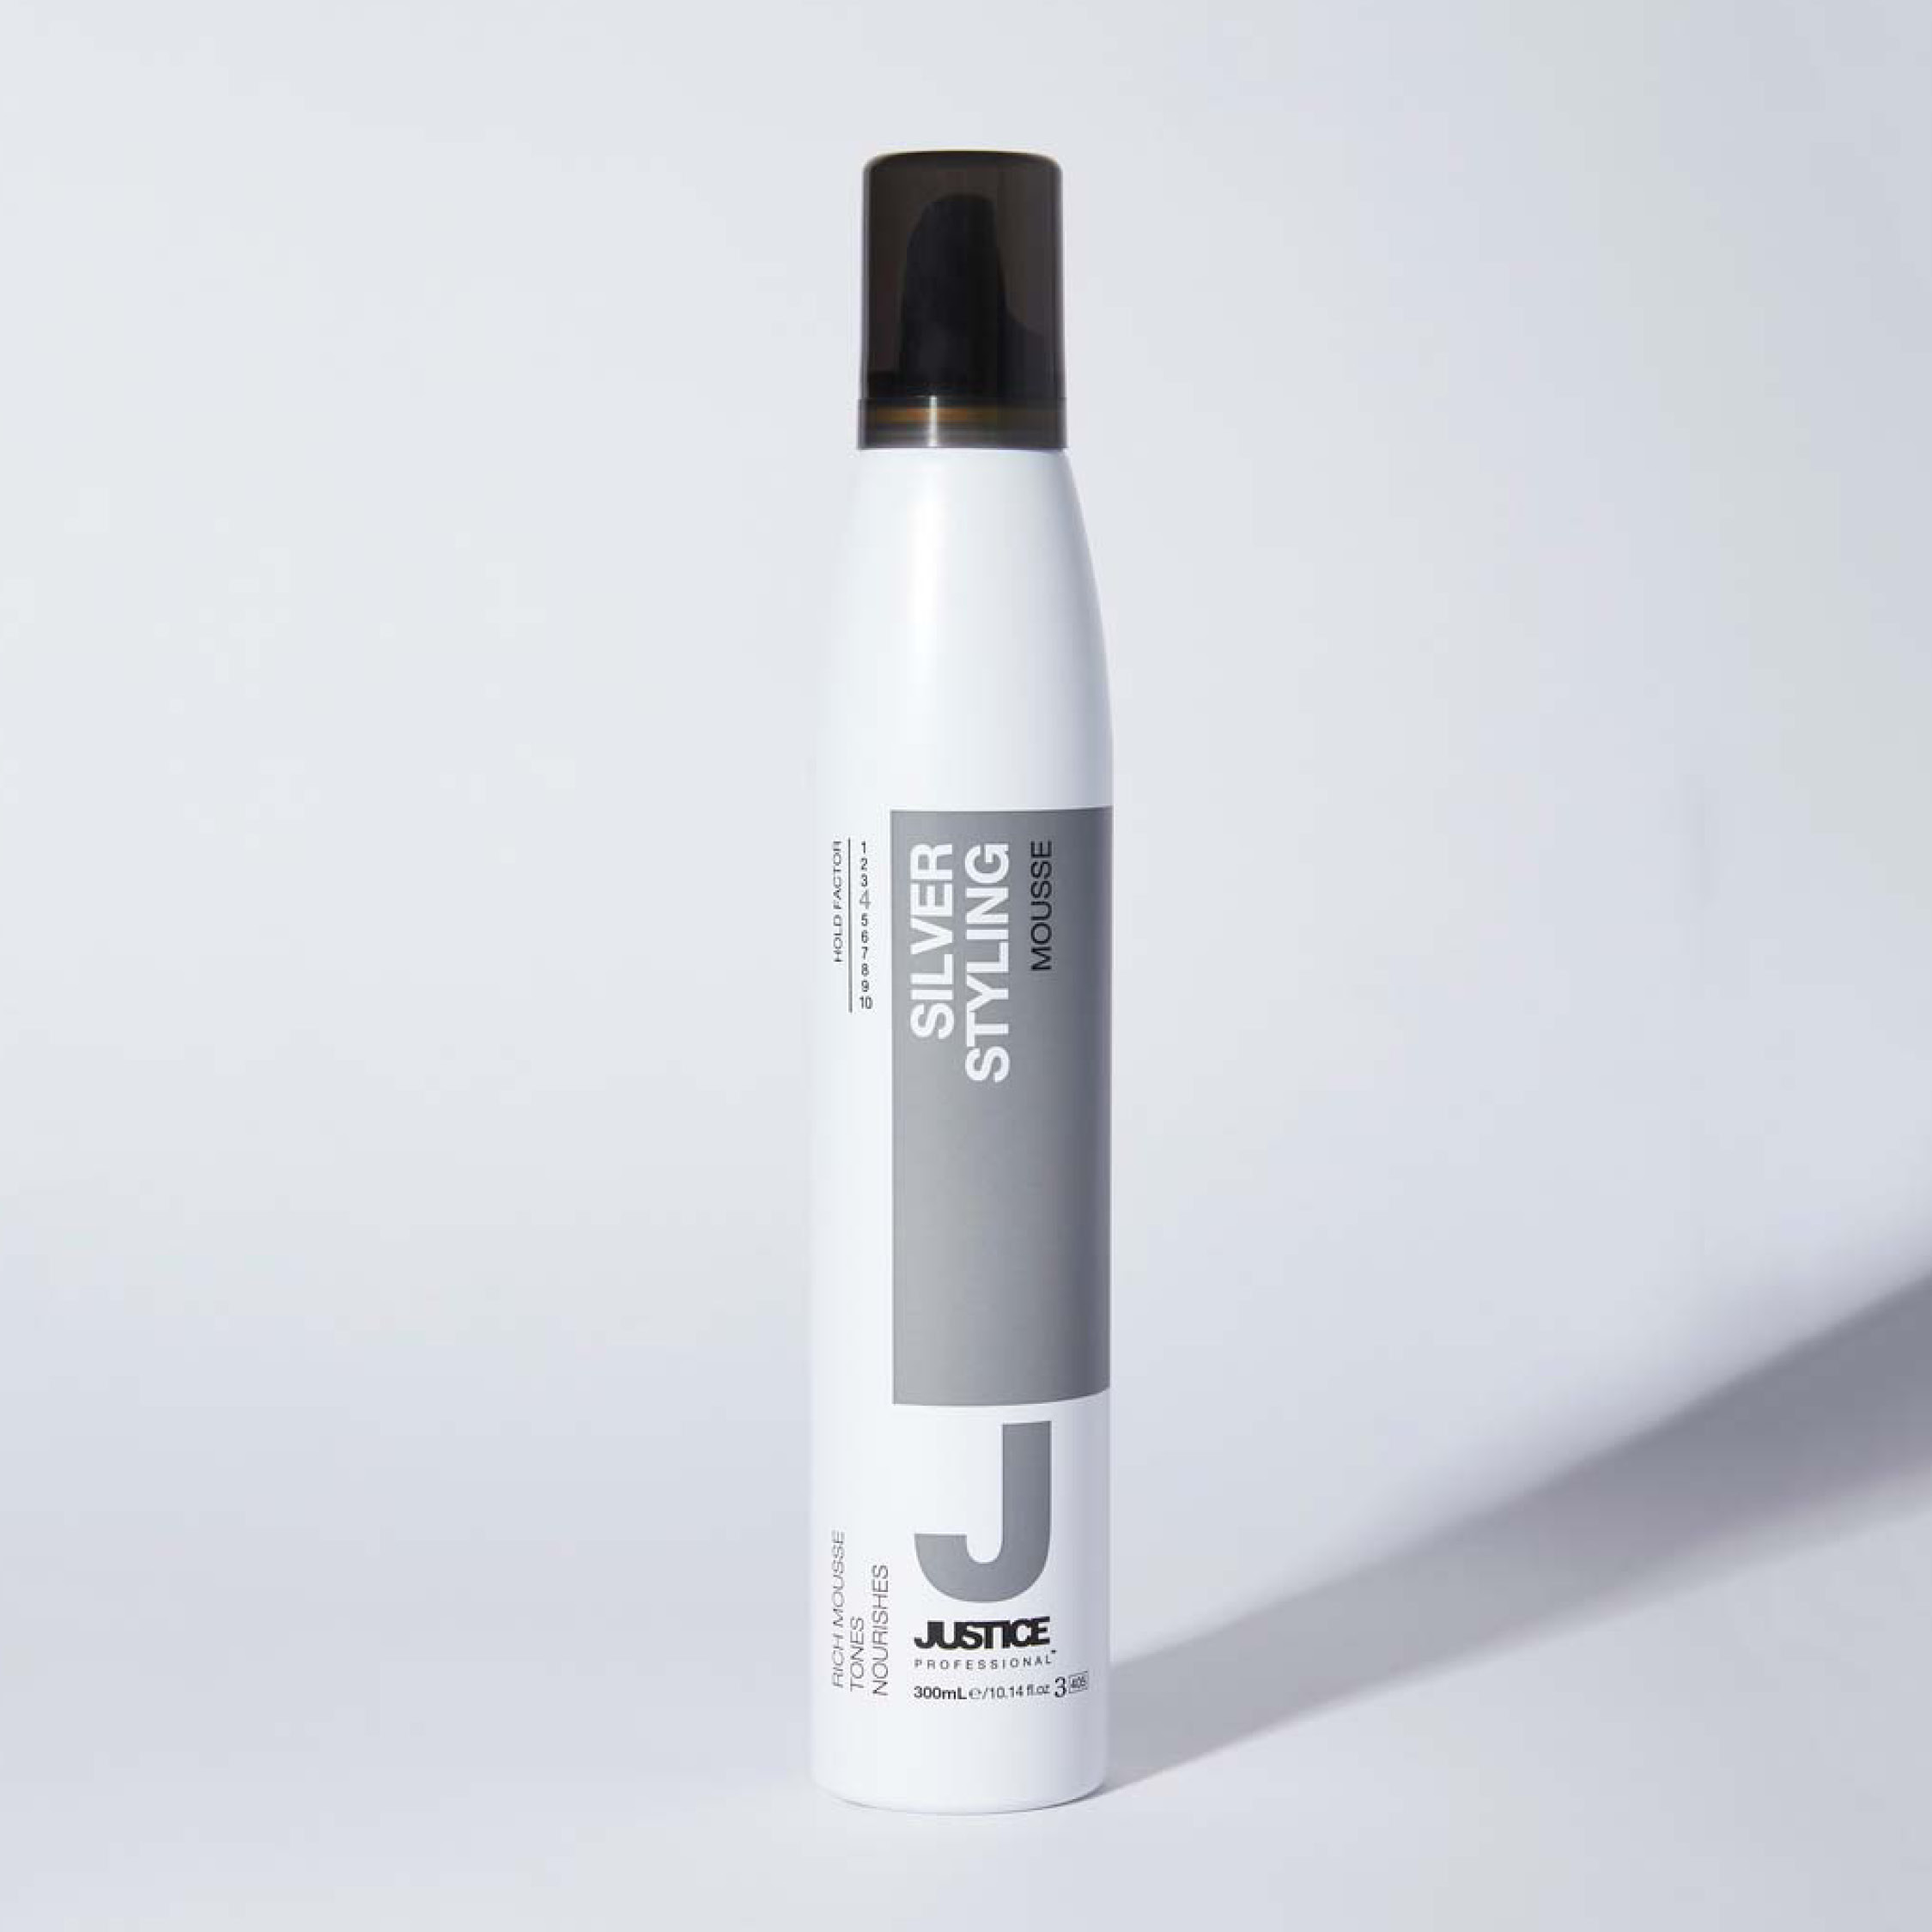 Just Cuts Australia - Styling - Silver Styling Mousse